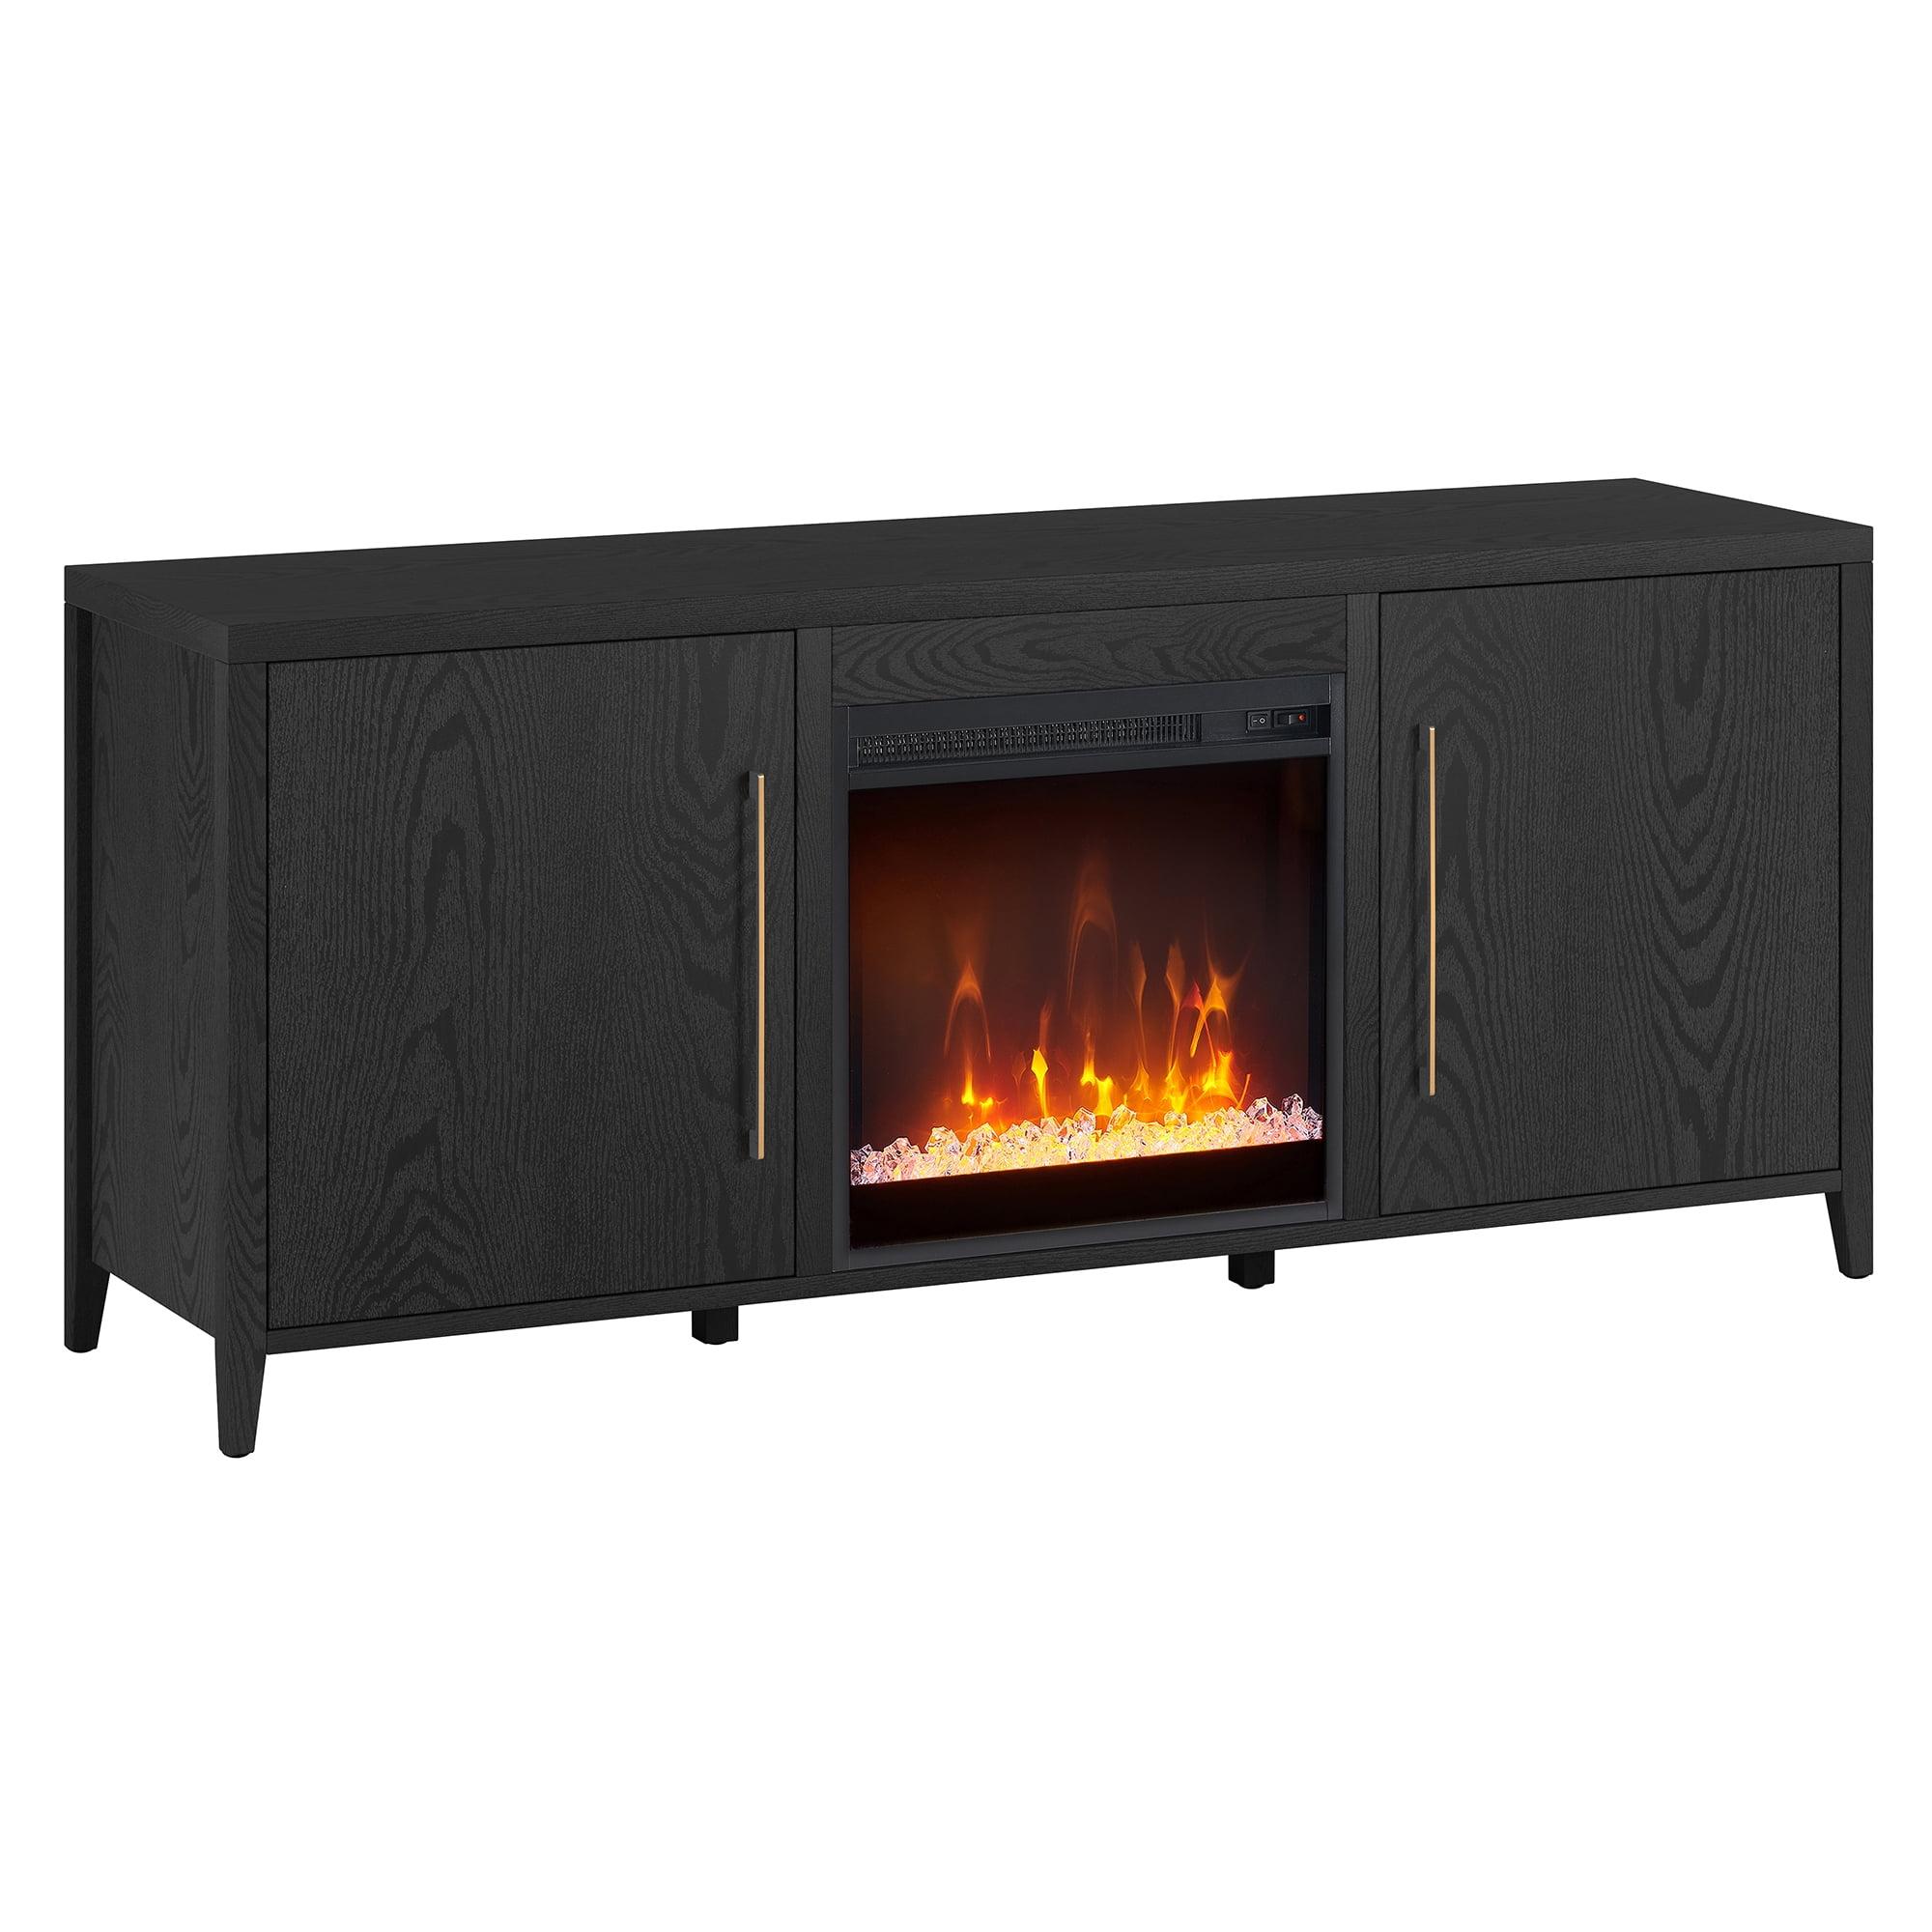 Jasper 70-inch Black Grain Metal TV Stand with Crystal Fireplace